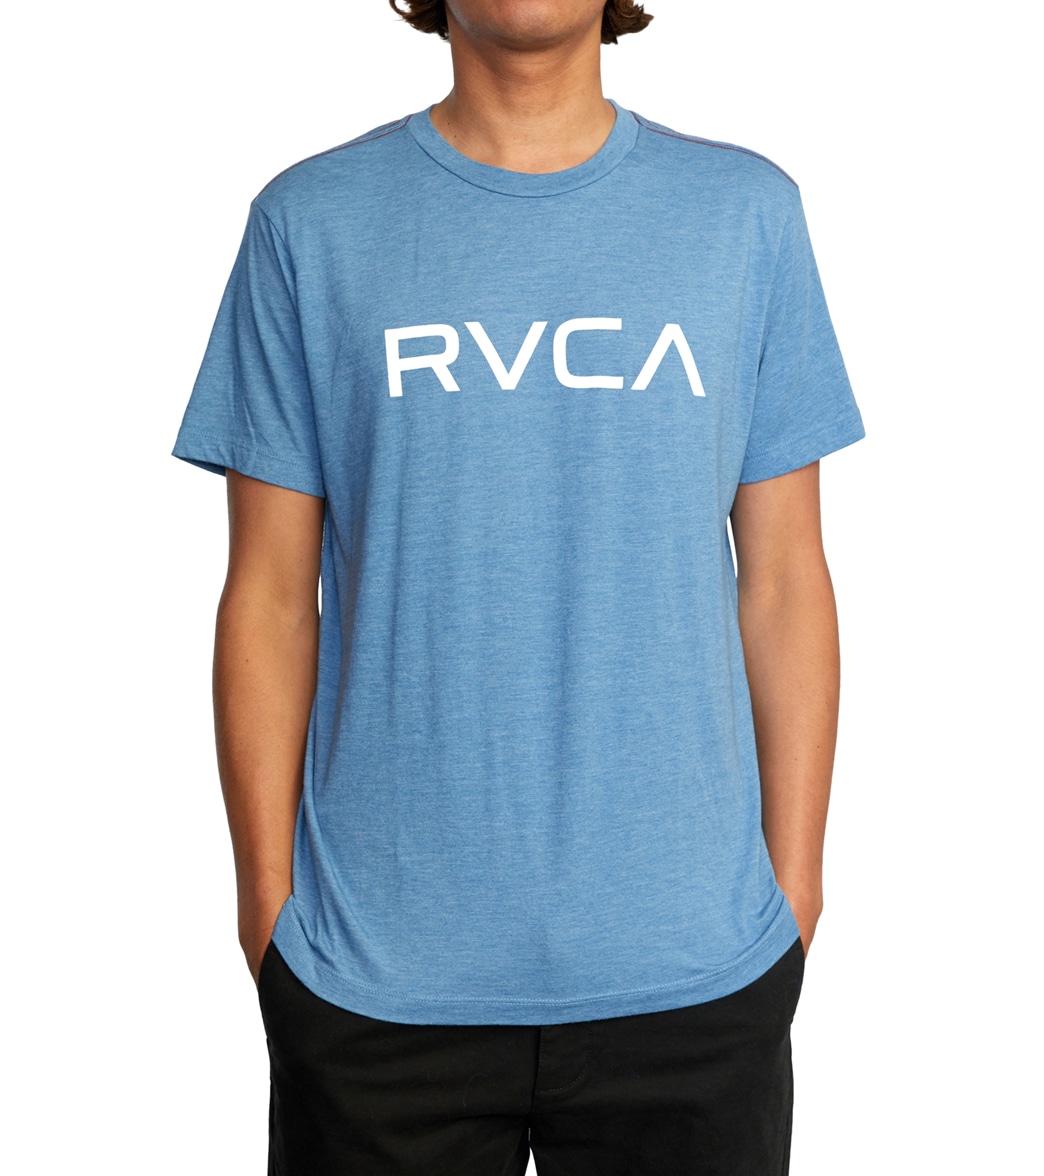 Men's Big Rvca Short Sleeve Tee Shirt - French Blue Large Cotton/Polyester - Swimoutlet.com